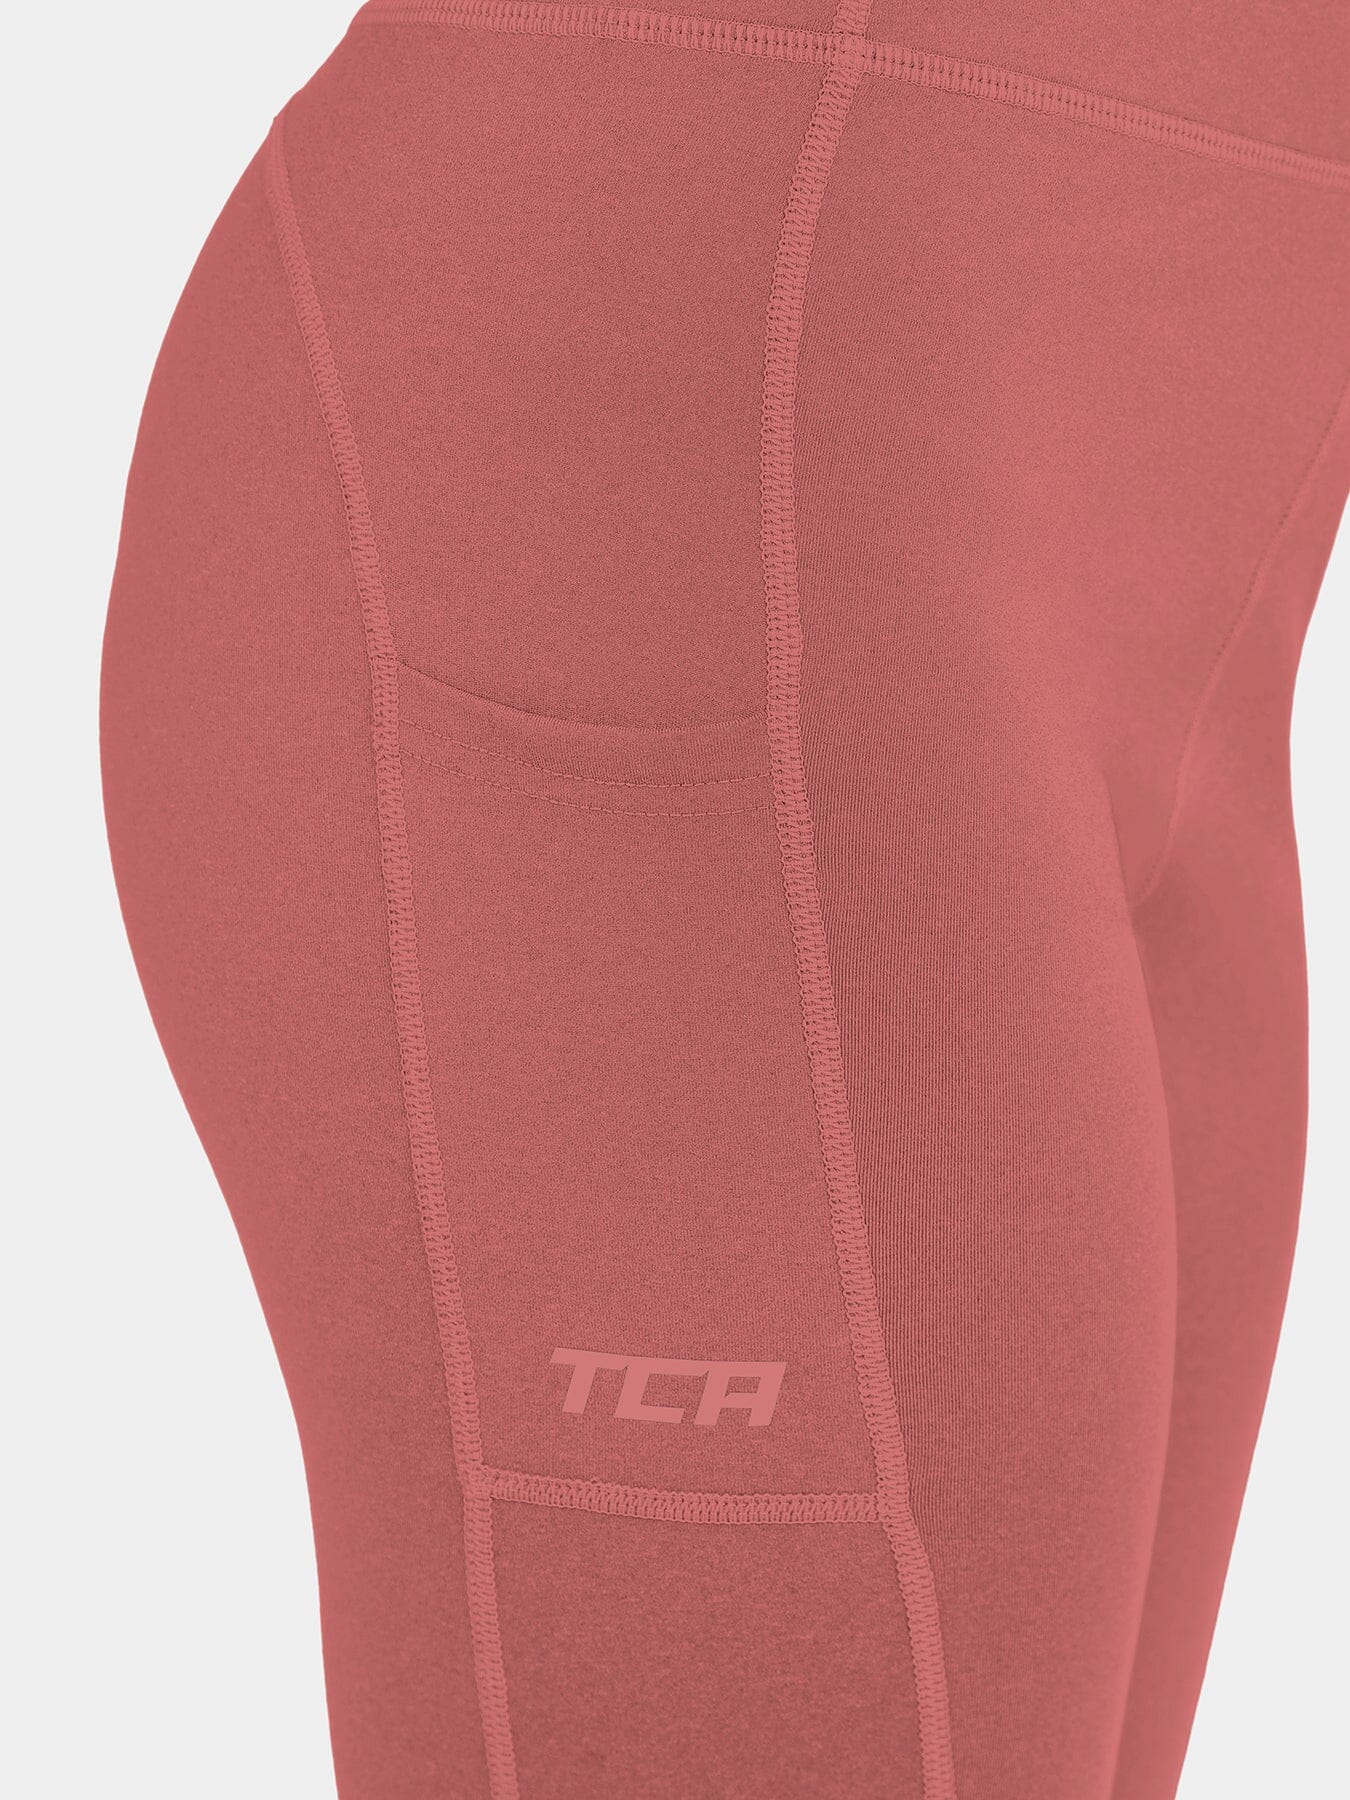 SuperThermal Compression Base Layer Tights for Girls With Brushed Inner Fabric